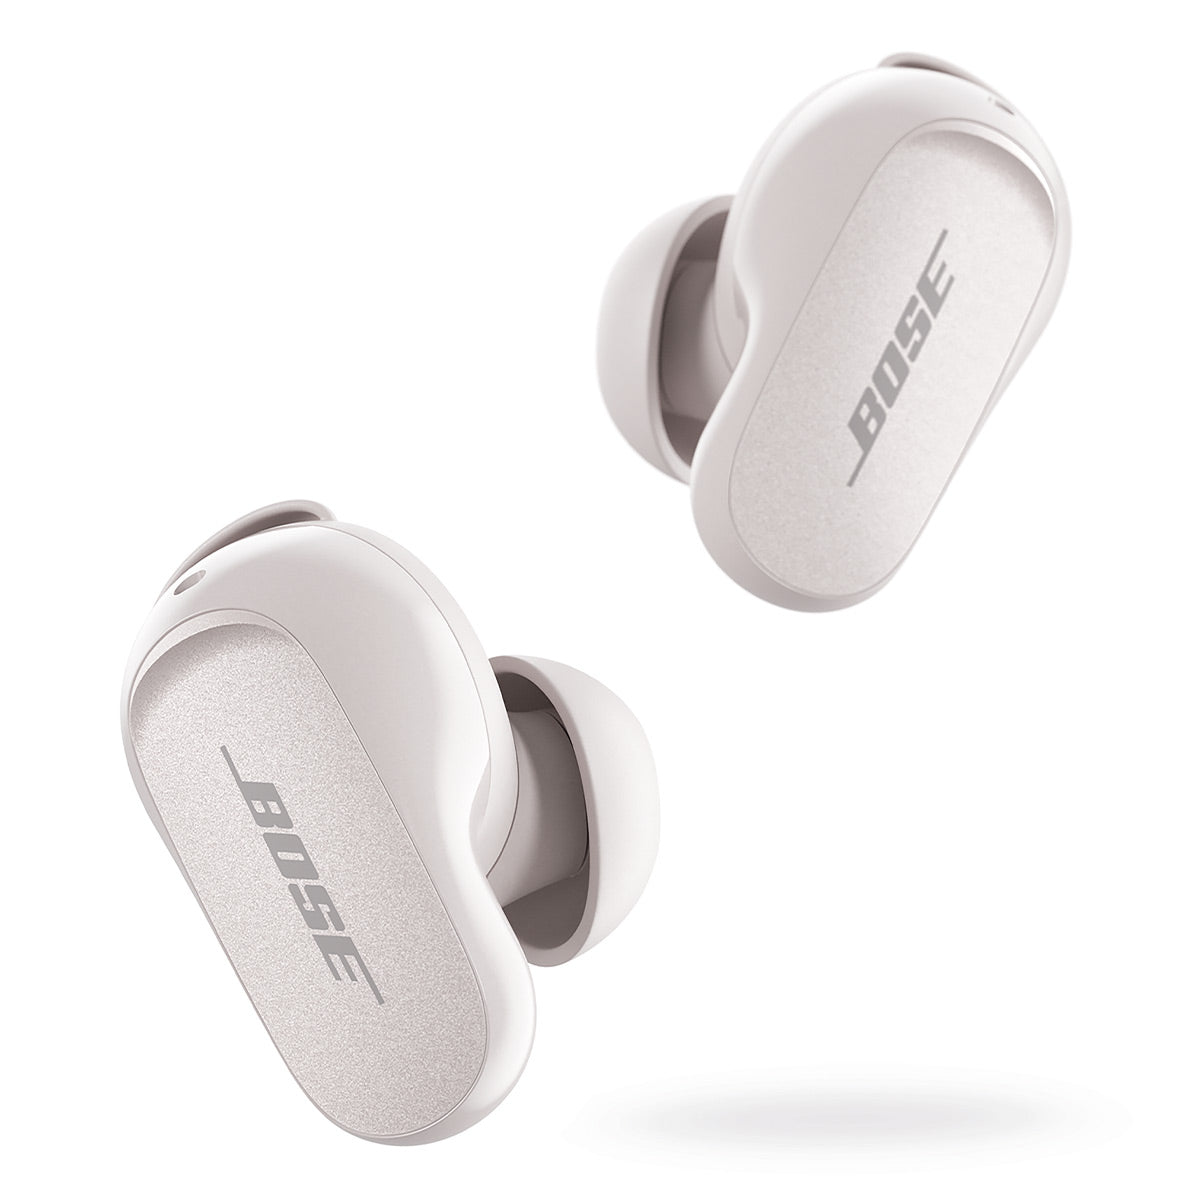 Bose QuietComfort Earbuds II True Wireless with Personalized Noise Cancellation (Soapstone) and Bose SoundLink Flex Bluetooth Portable Speaker (Stone Blue)